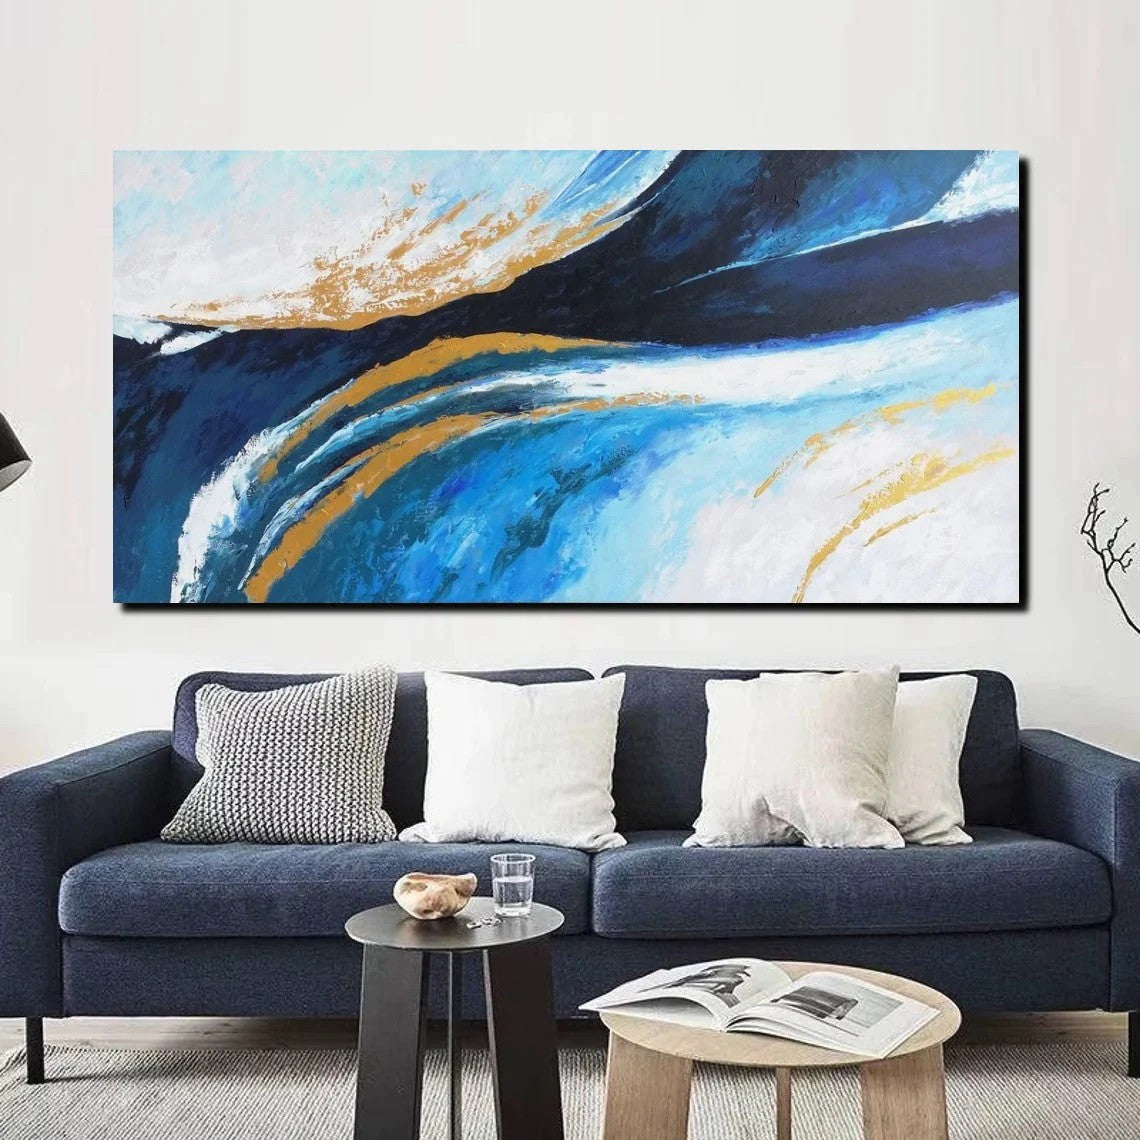 Living Room Wall Art Paintings, Blue Acrylic Abstract Painting Behind Couch, Large Painting on Canvas, Buy Paintings Online, Acrylic Painting for Sale